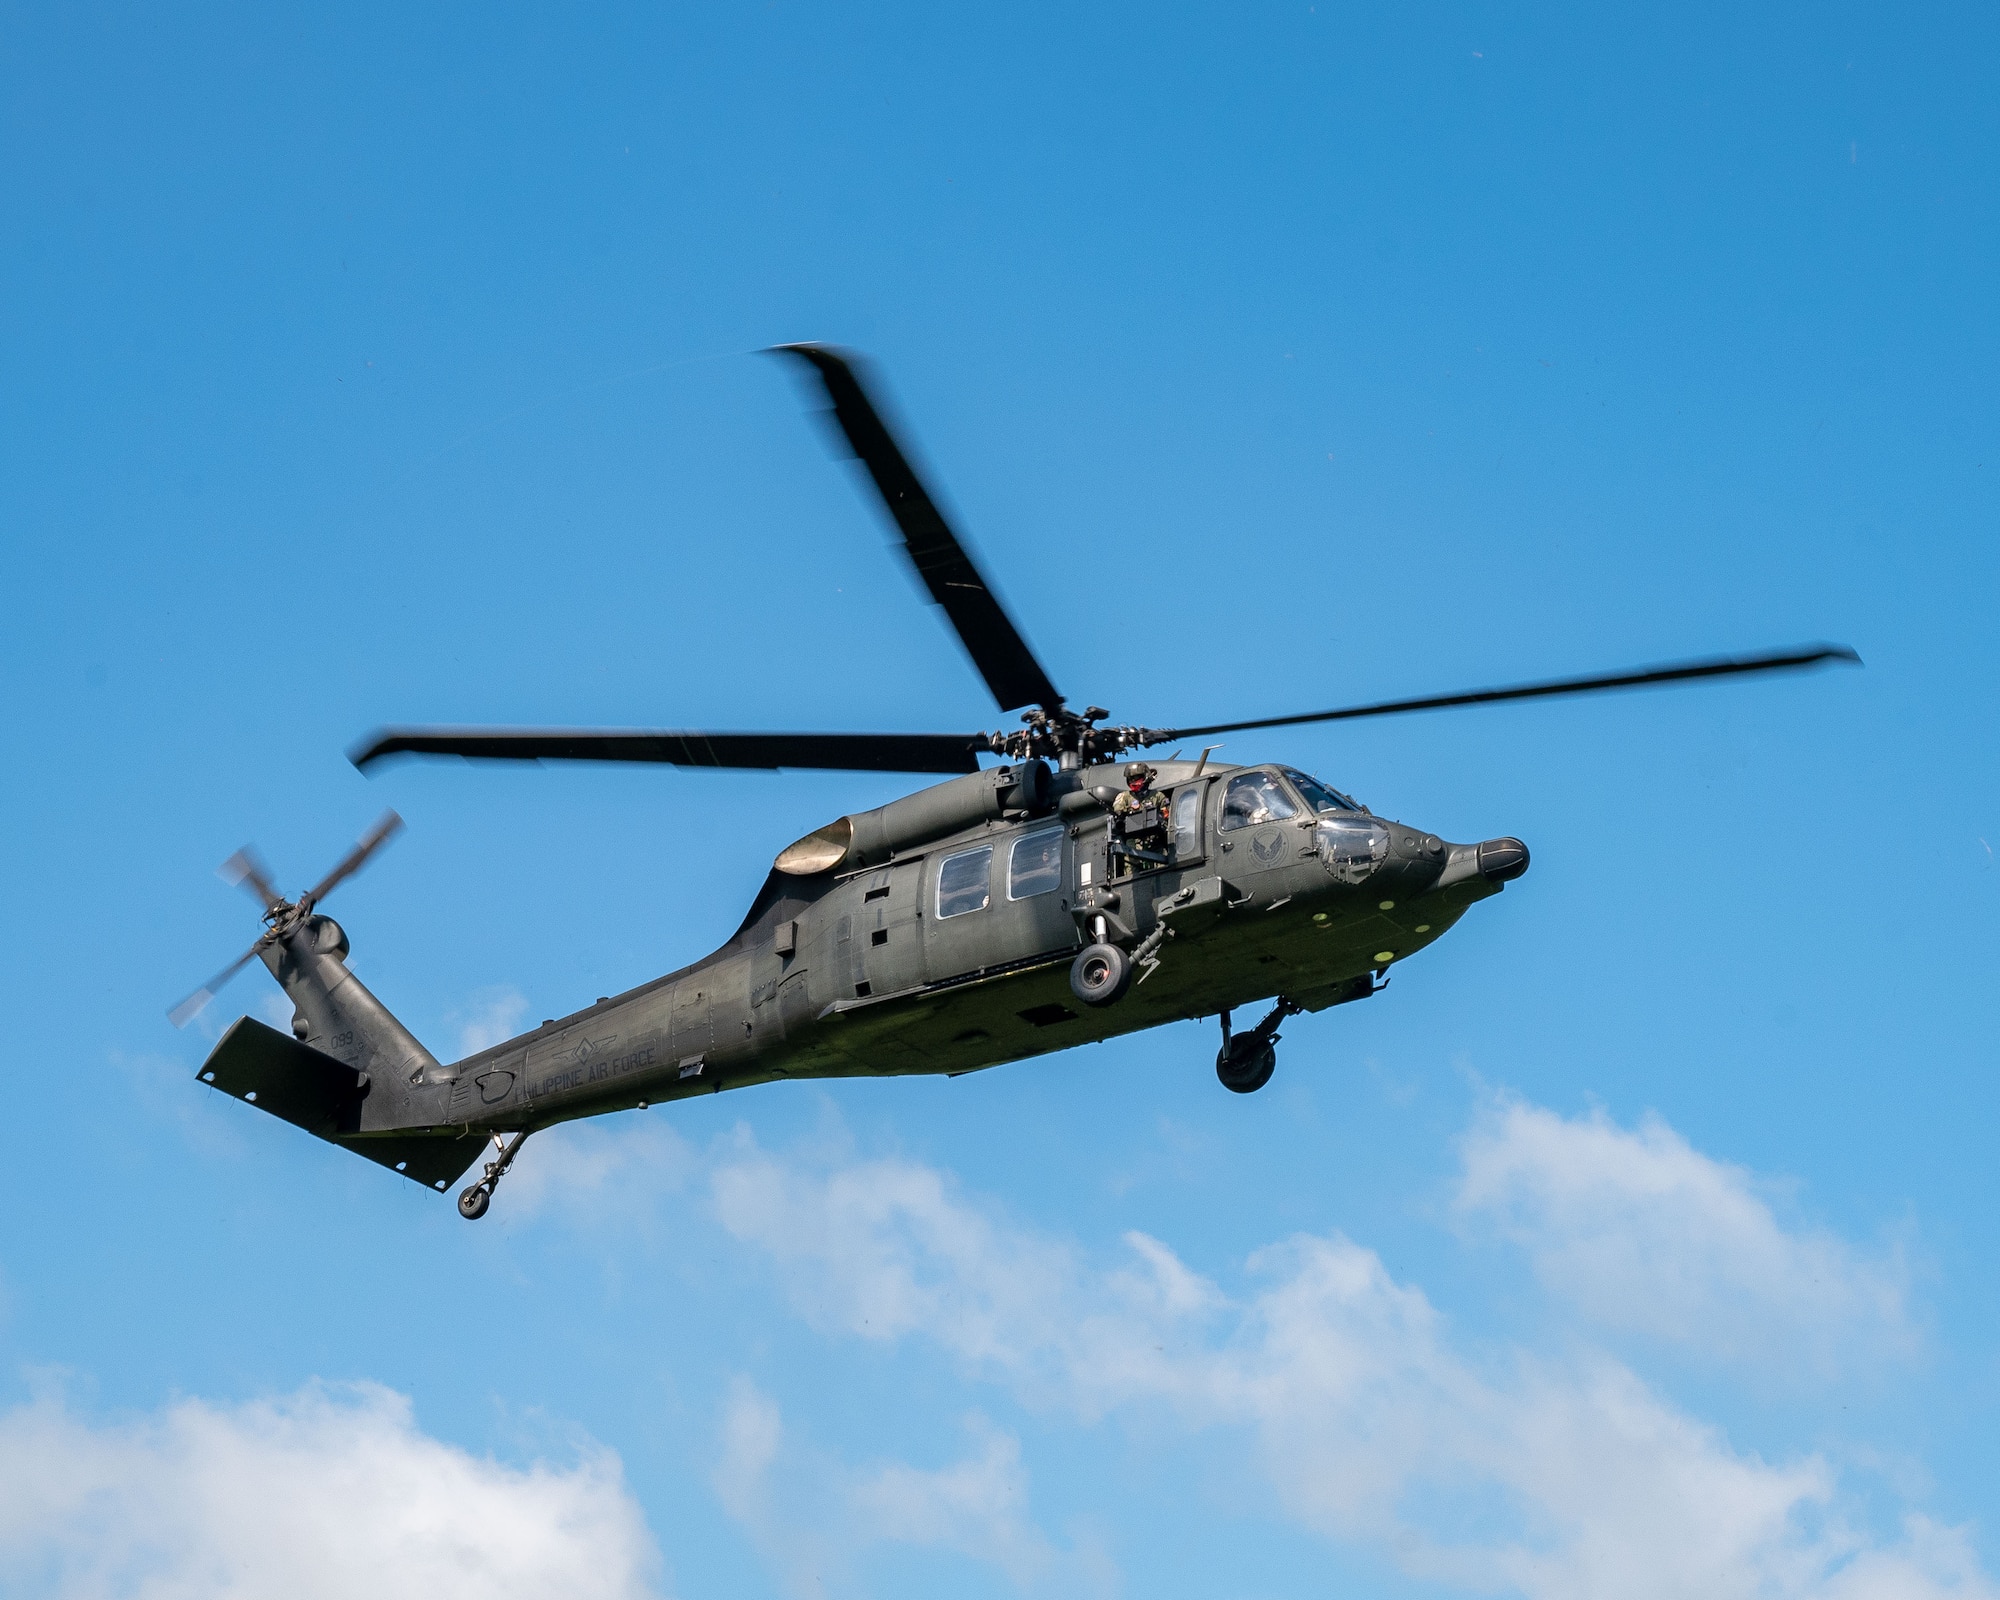 A Philippine Air Force S-70i Black Hawk prepares to land in a simulated disaster site during the mass assurance exercise for U.S. Air Force and Philippine Air Force medical personnel as part of Pacific Airlift Rally 2023 at Clark Air Base, Philippines, Aug. 16, 2023. The U.S. and Philippines’ combined readiness and interoperability, especially in the area of HA/DR, ensures we are ready to respond to a wide range of challenges, disasters, and threats. (U.S. Air Force photo by Senior Airman Jordan Smith)